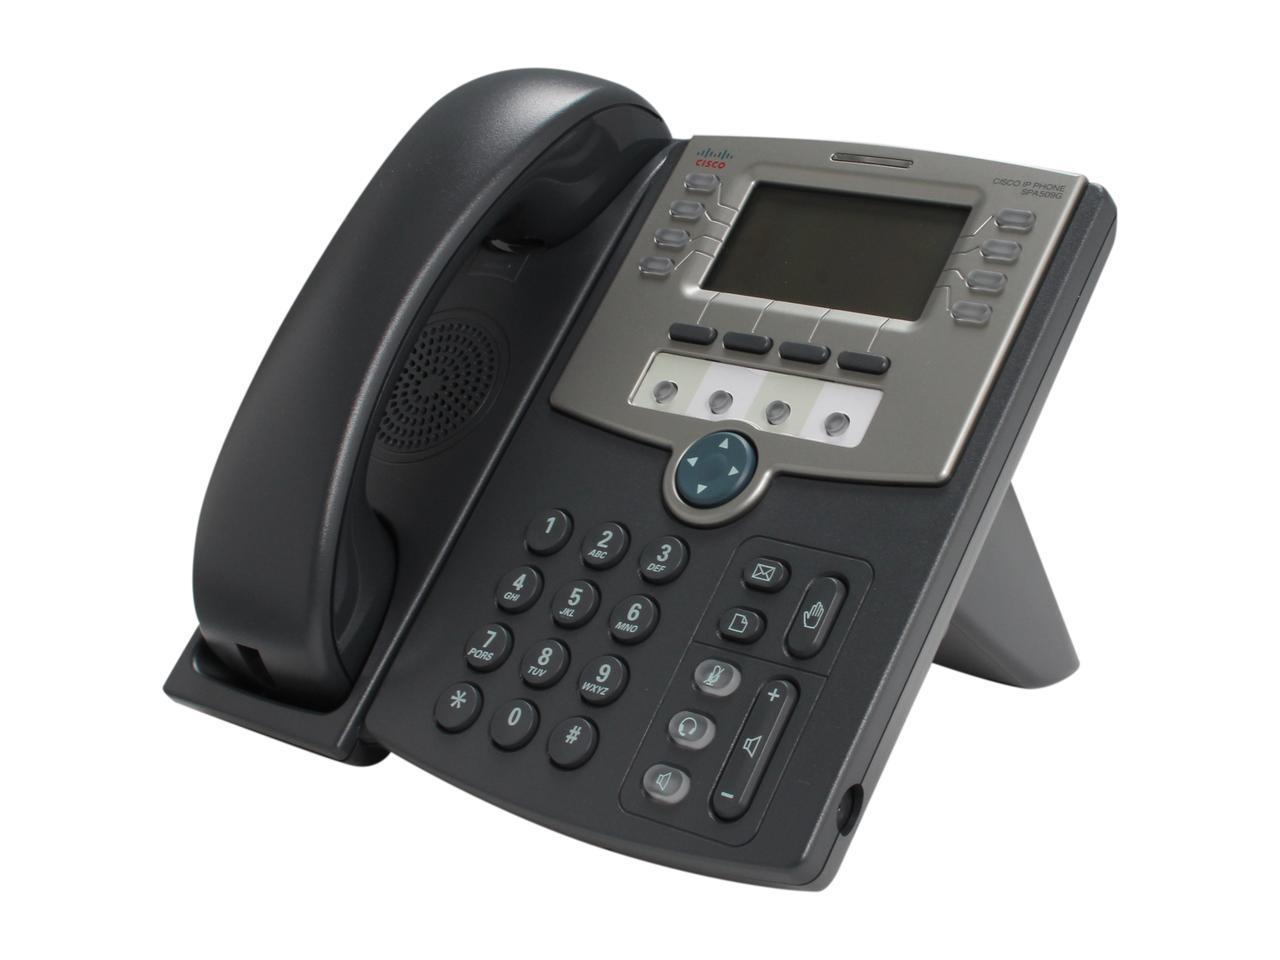 Cisco Small Business SPA509G 12 Line IP Phone With Display PoE and PC Port